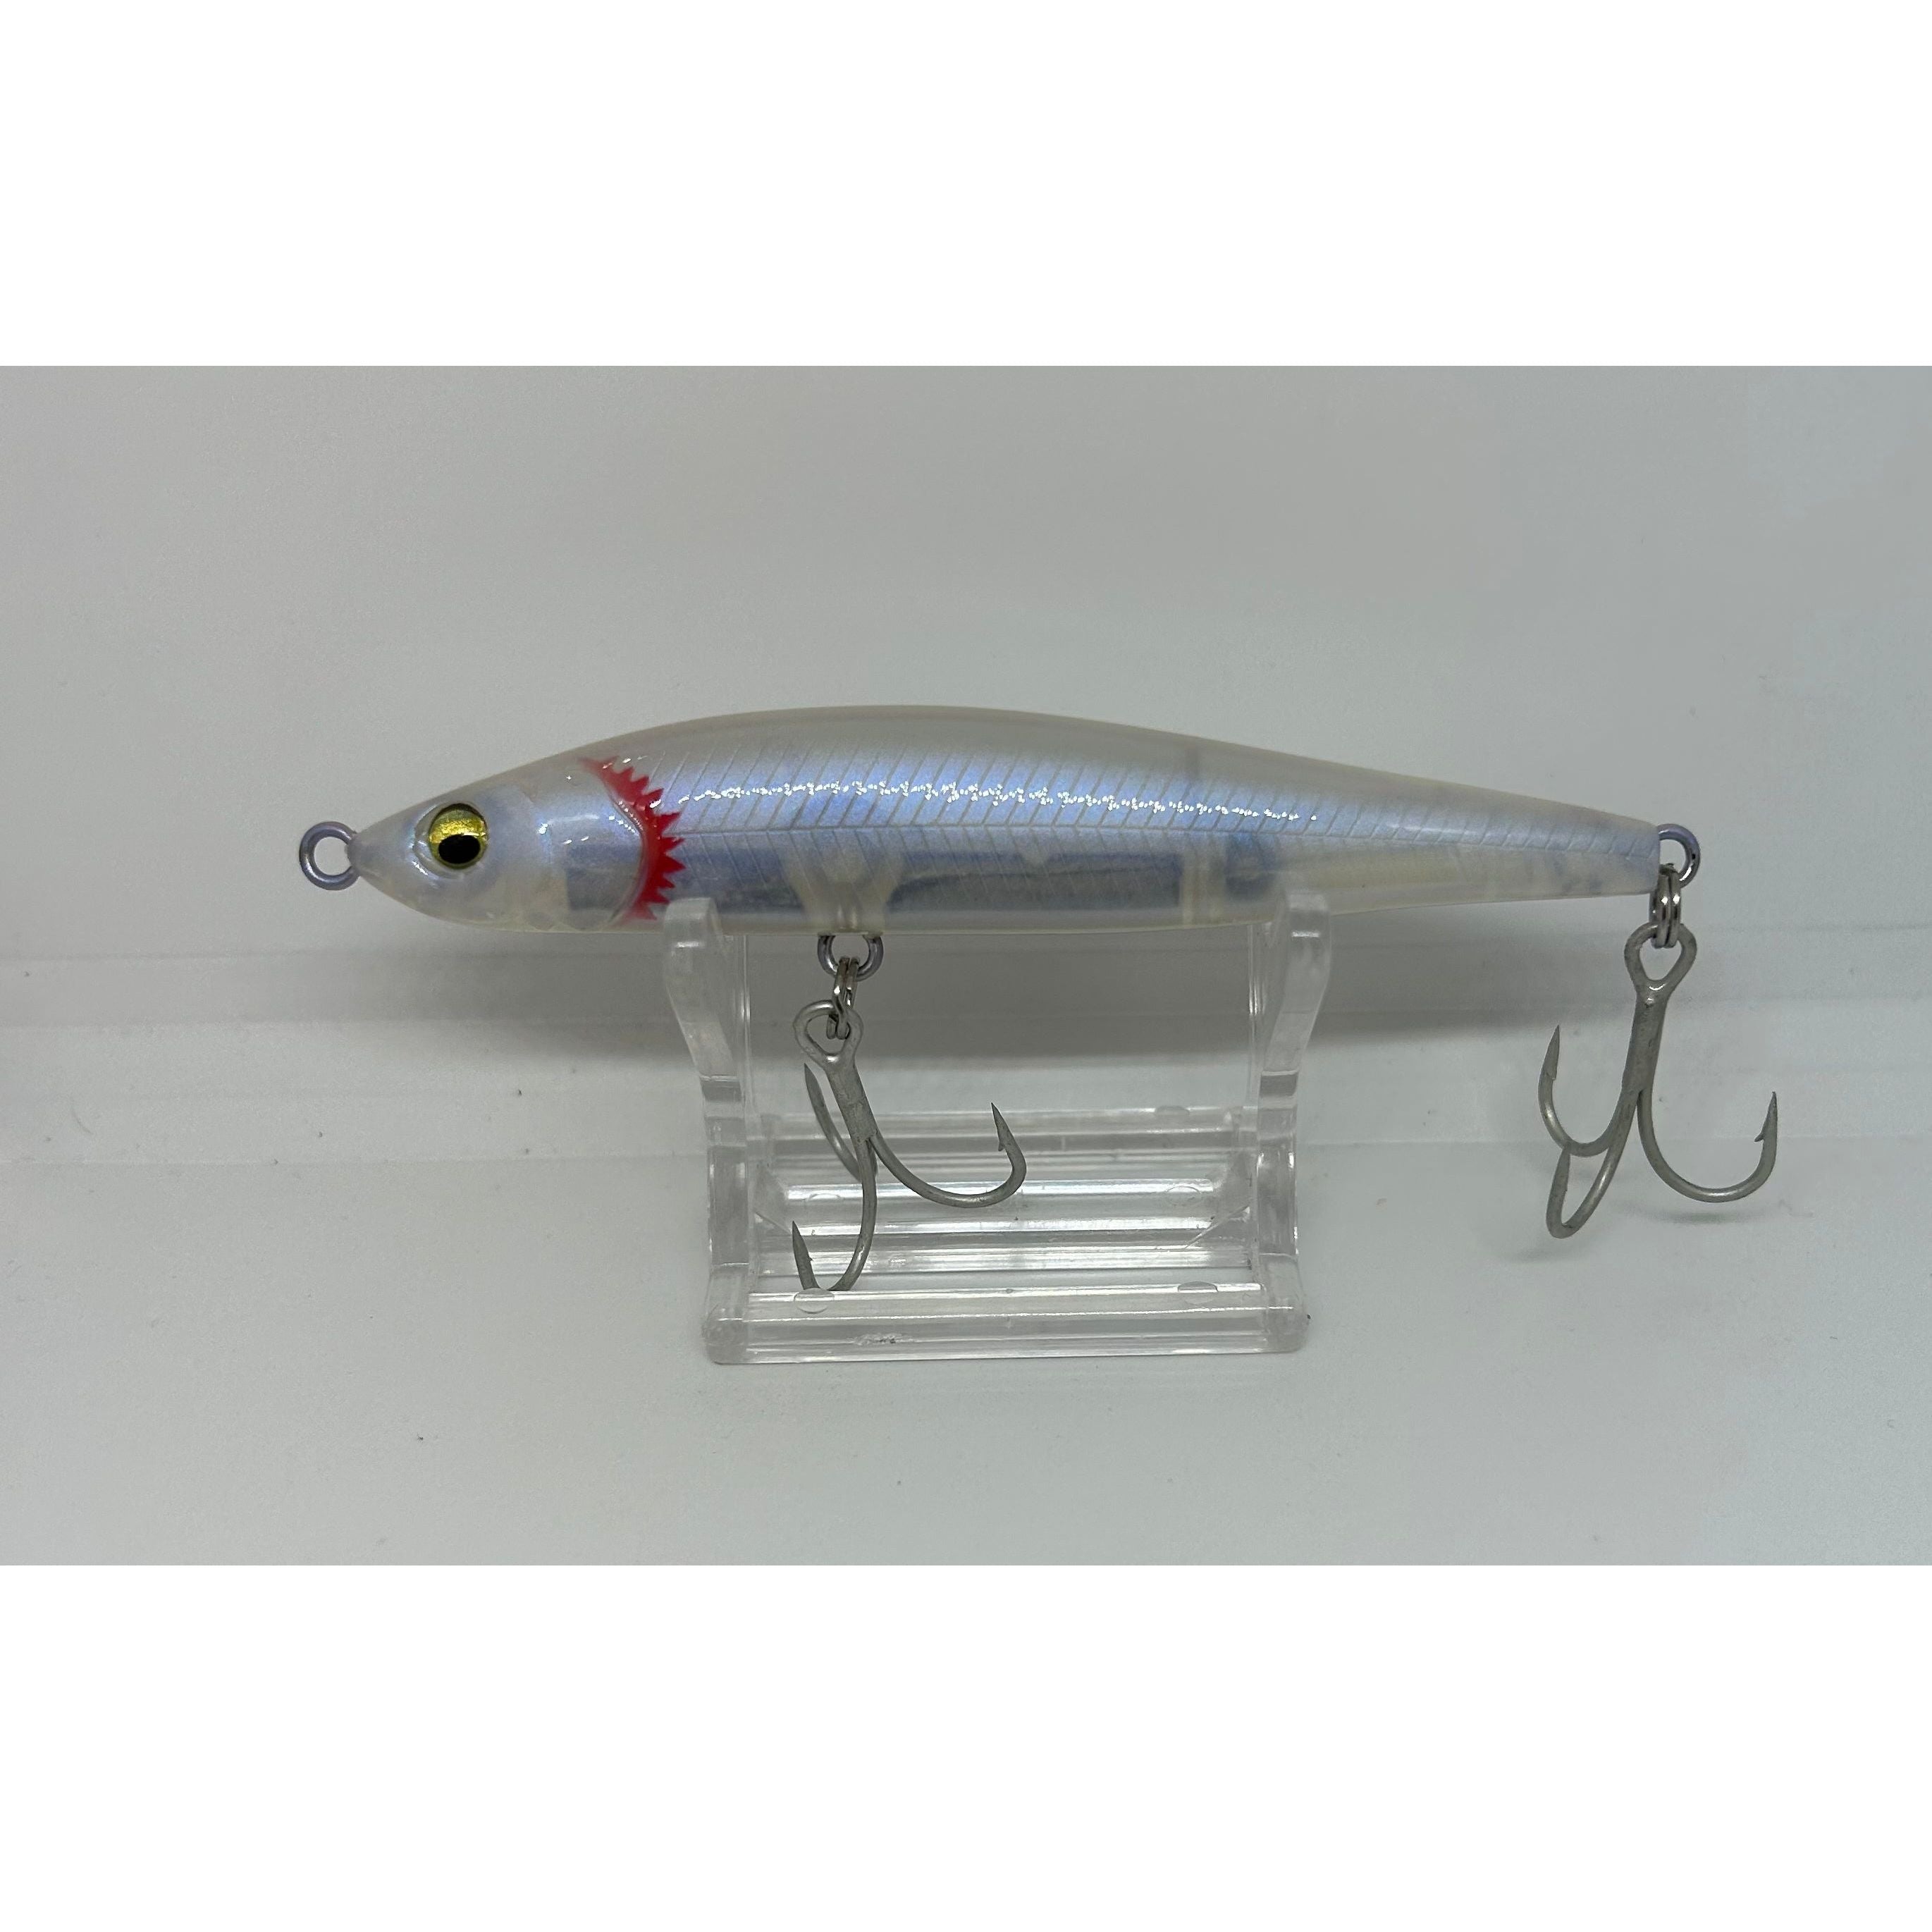 Bass Pollack Sinking pencil lure 105mm 30g Slow Pitch shallow long